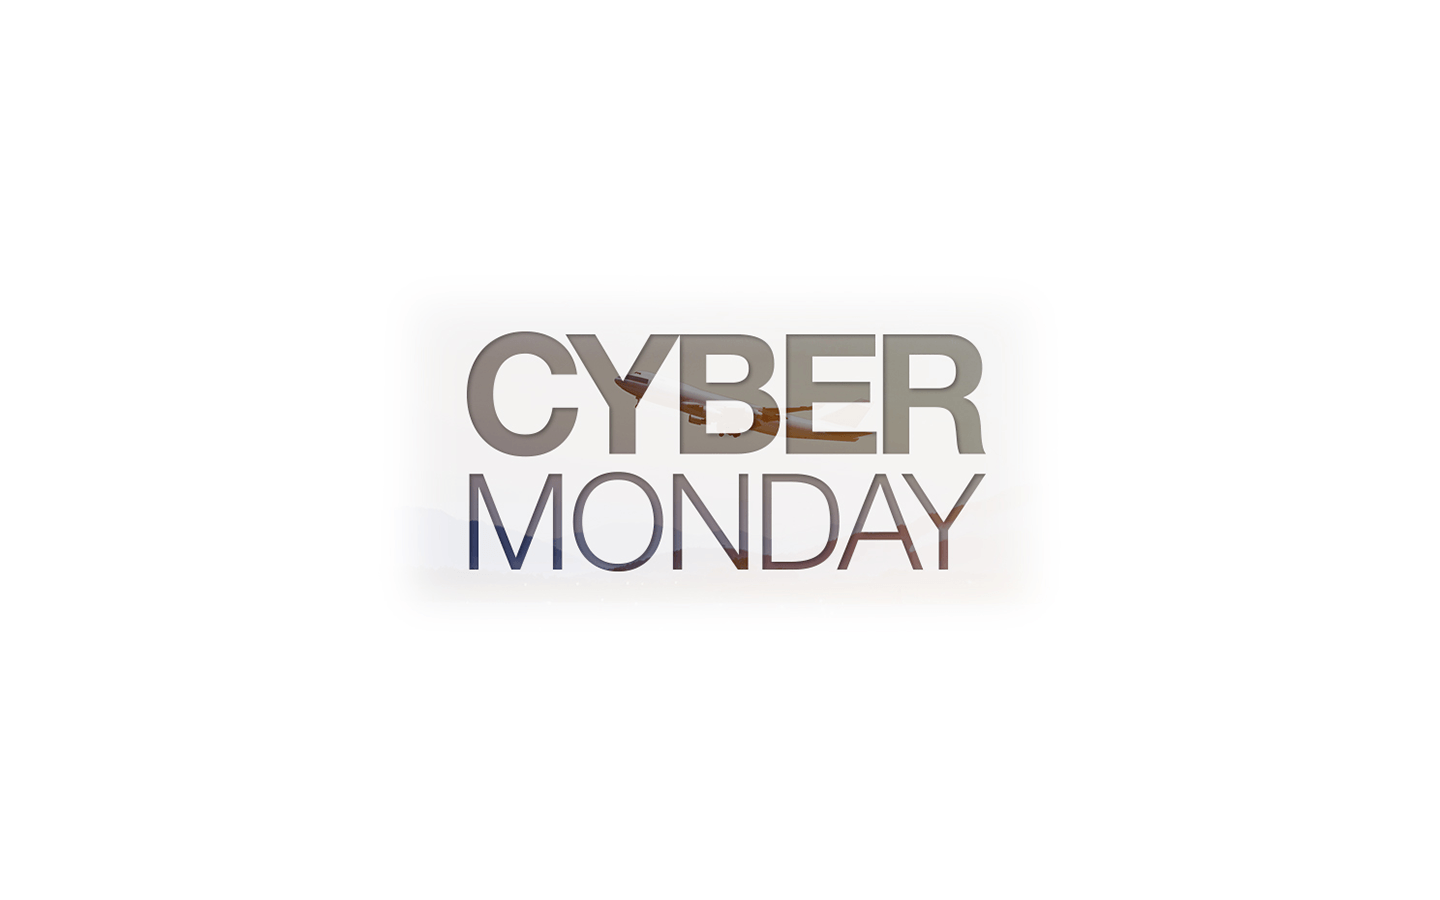 Cyber Monday Travel Deals of 2015